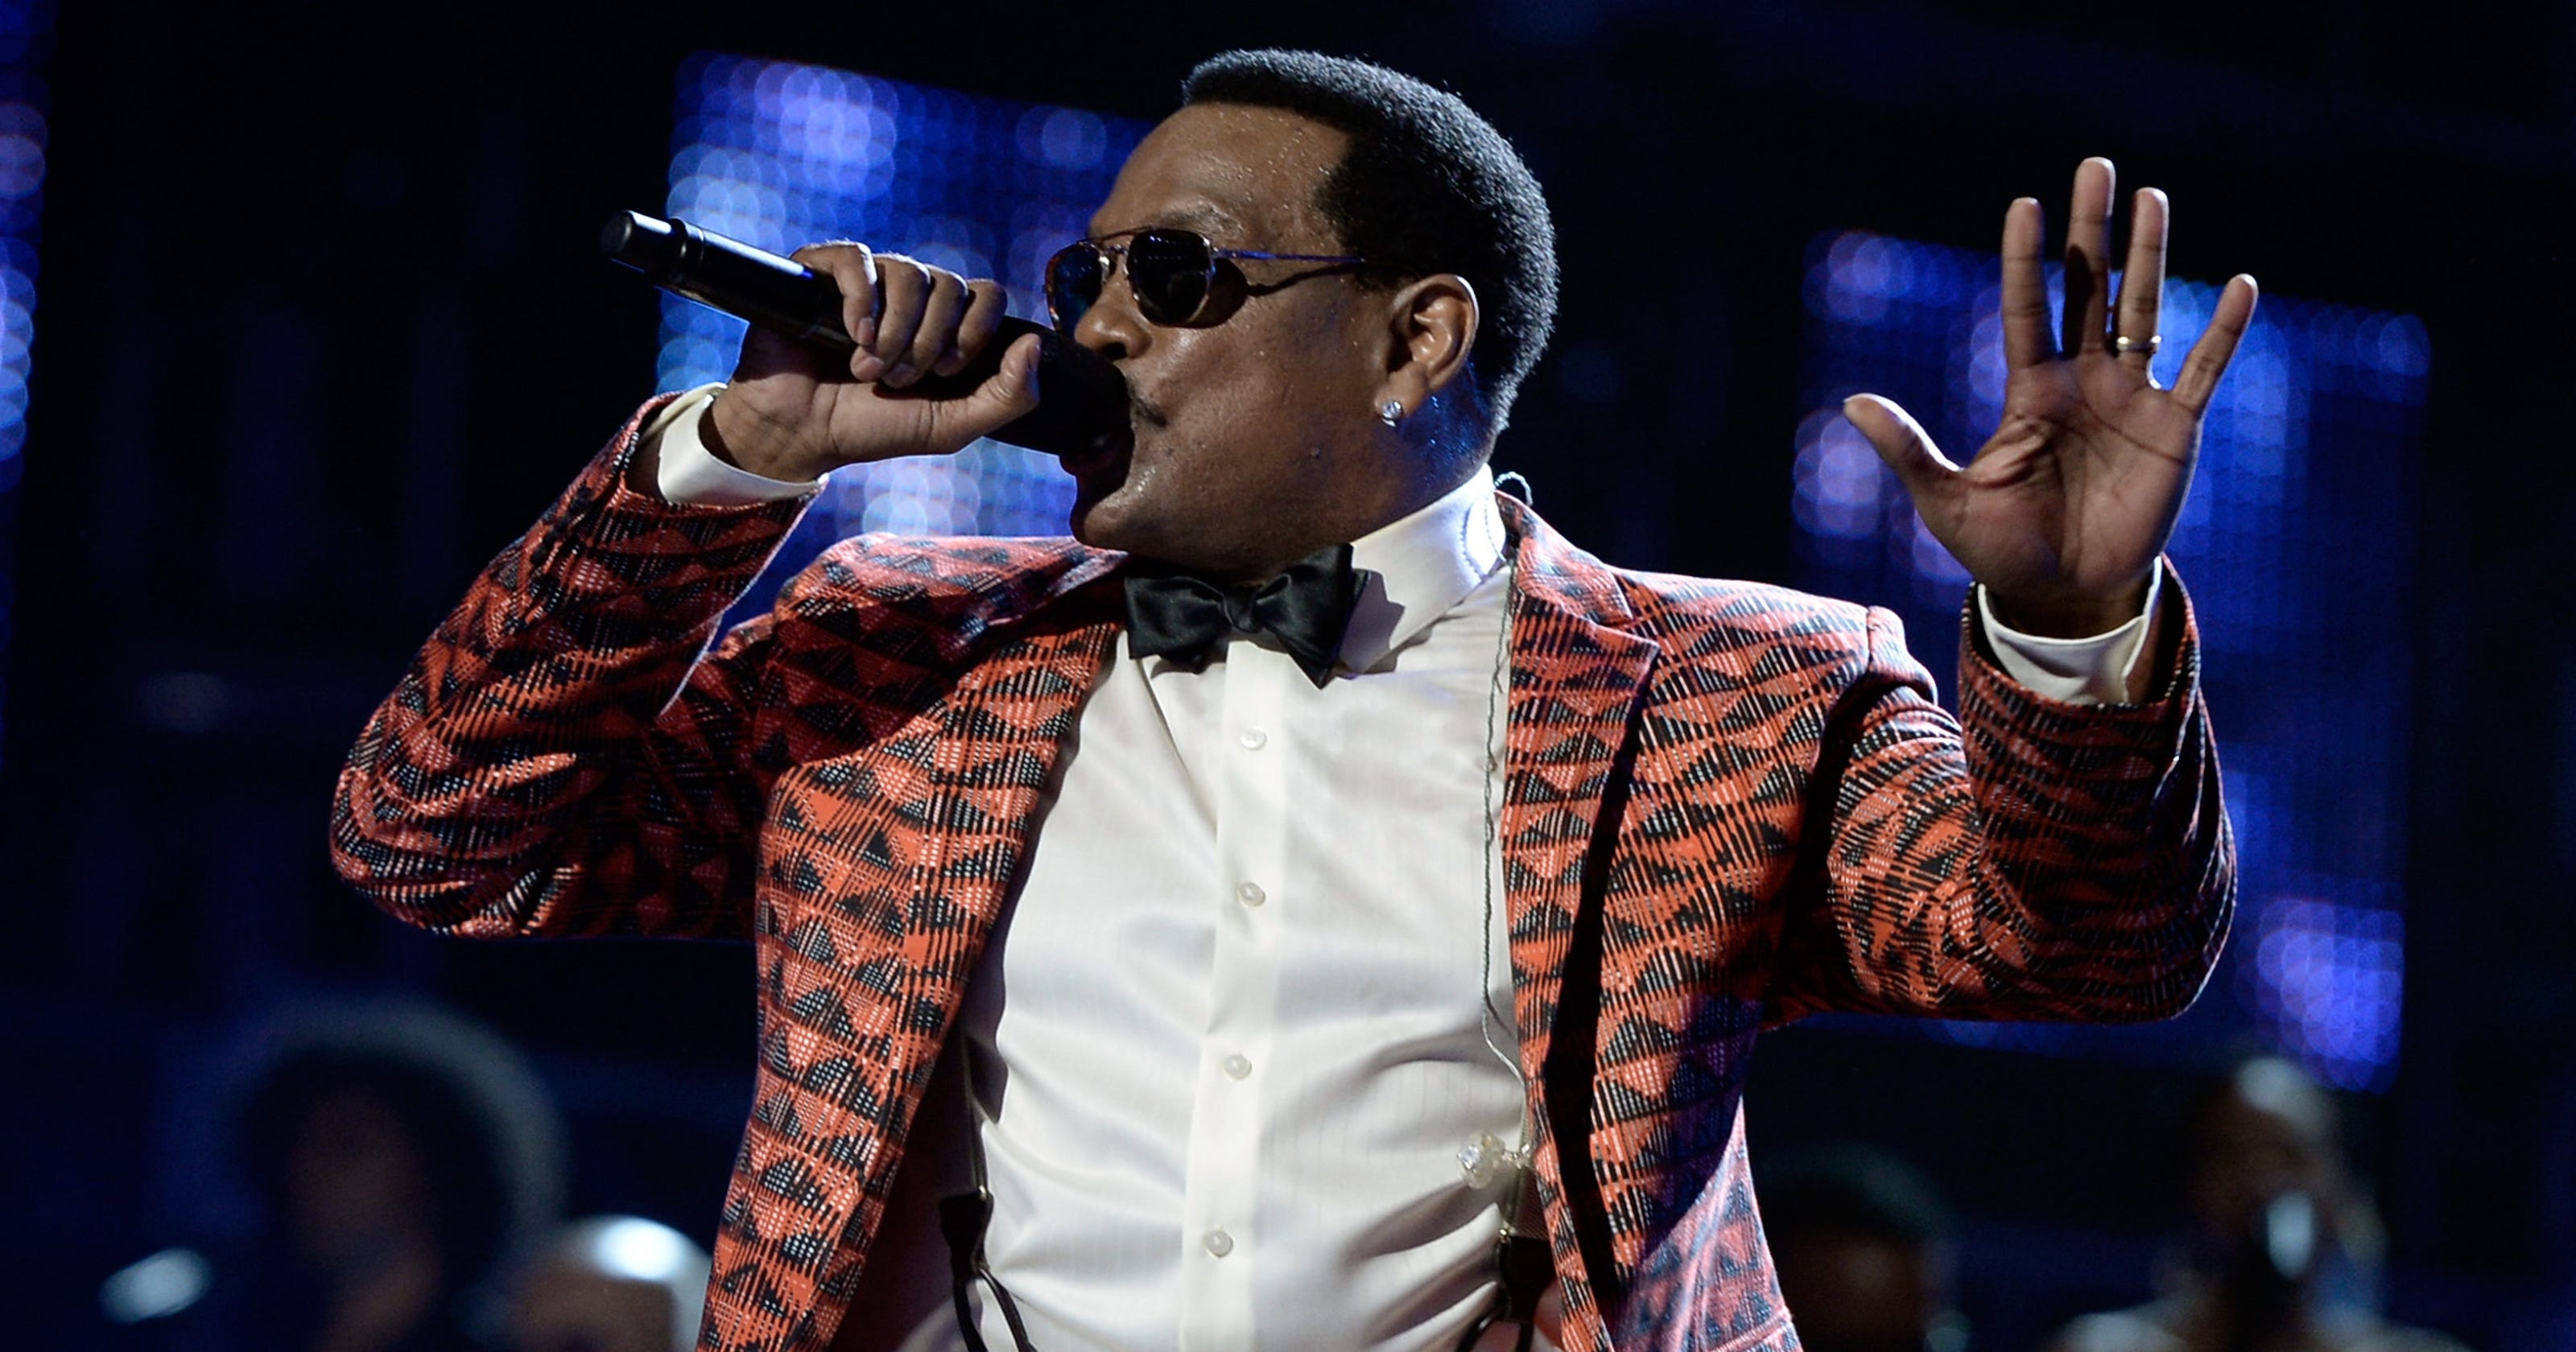 R&B's 'Uncle' Charlie Wilson has turned life around